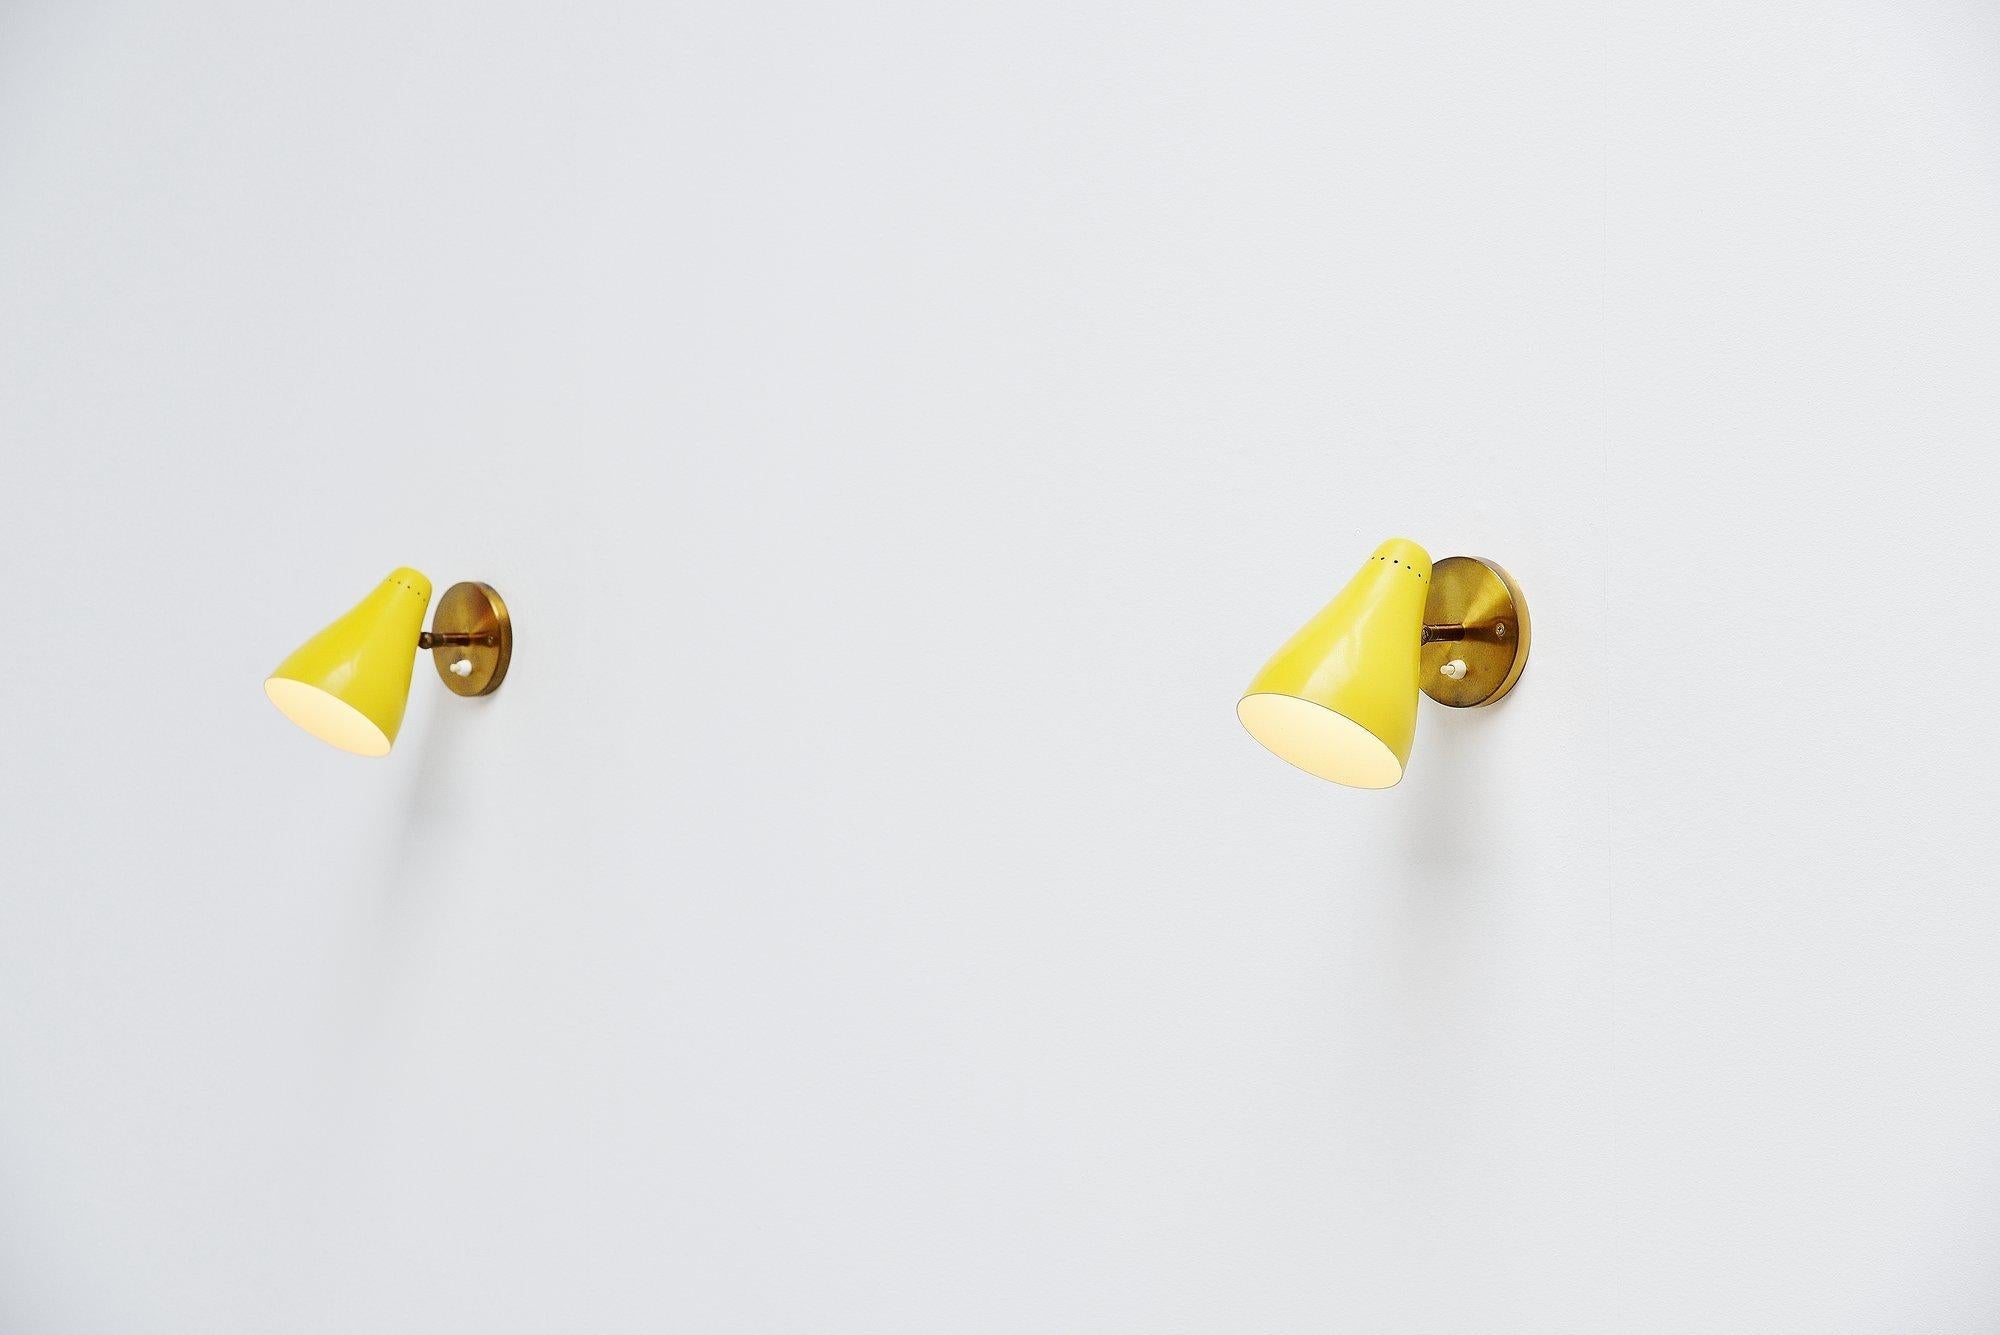 Early pair of sconces model 16c designed by Gino Sarfatti, manufactured by Arteluce, Italy 1948-1950. This early wall lamps have brass wall plates and yellow painted shades with die cut dot pattern at the top of the shade. The lamps are unmarked but